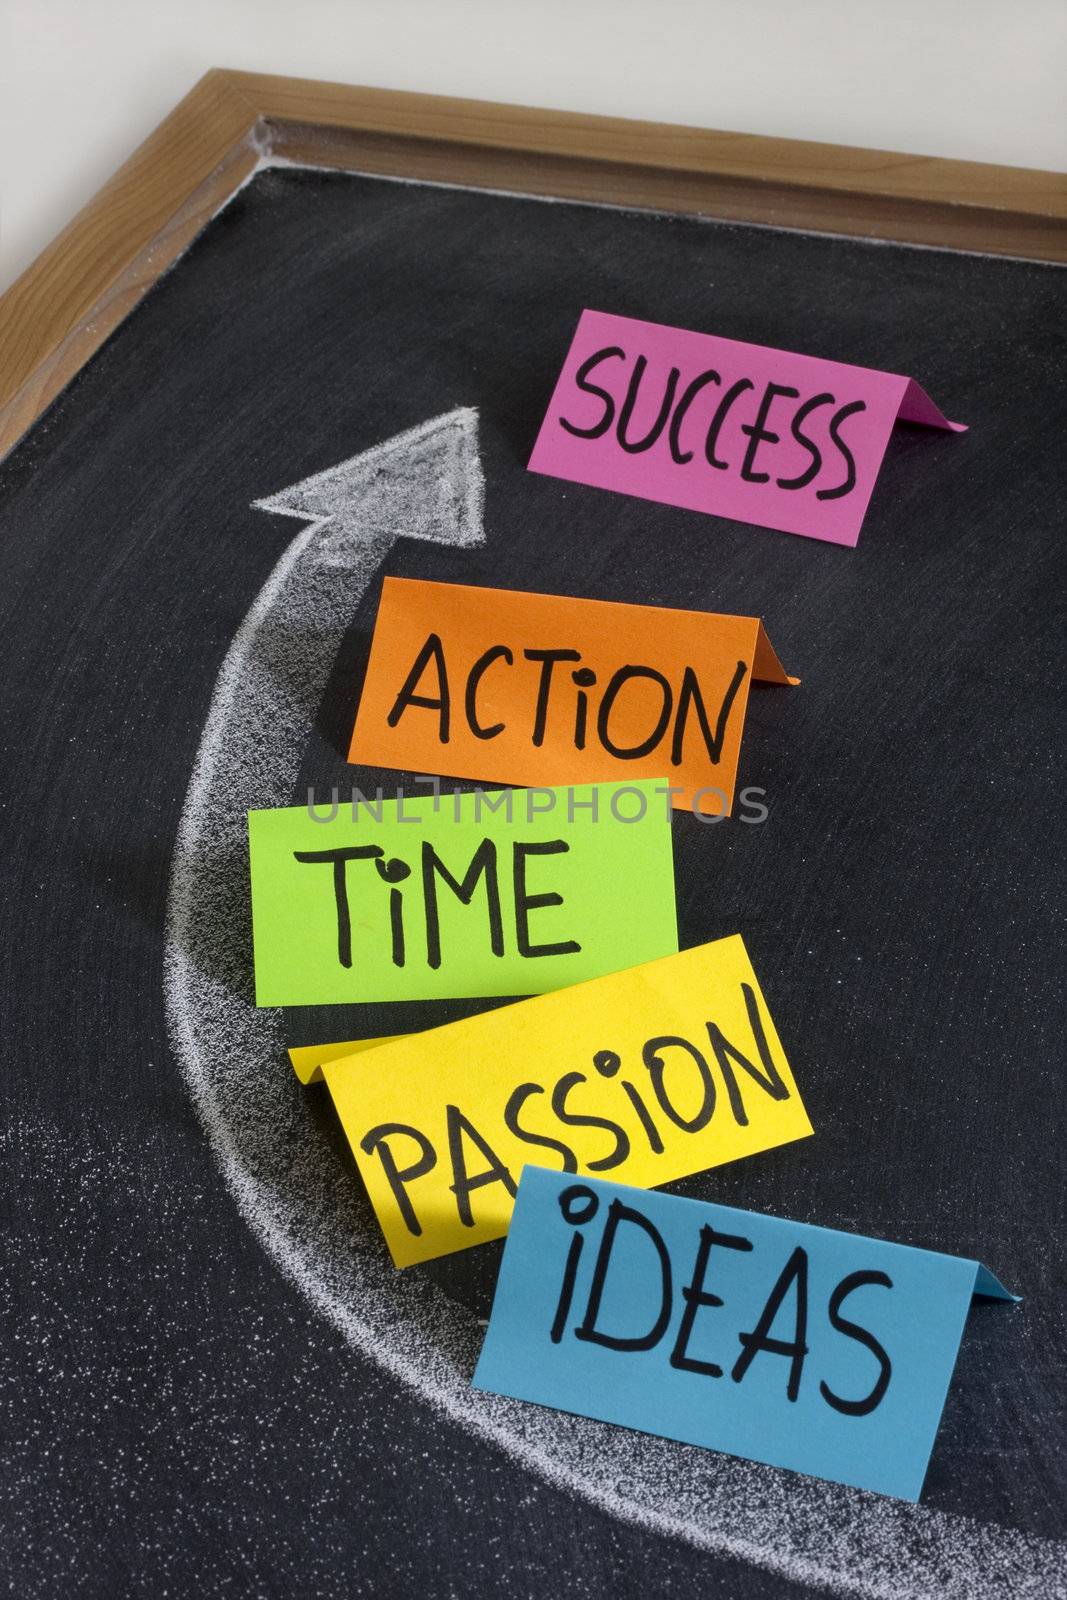 time, ideas, action, passion - success ingredients concept presented with colorful noted and white chalk drawing on blackboard